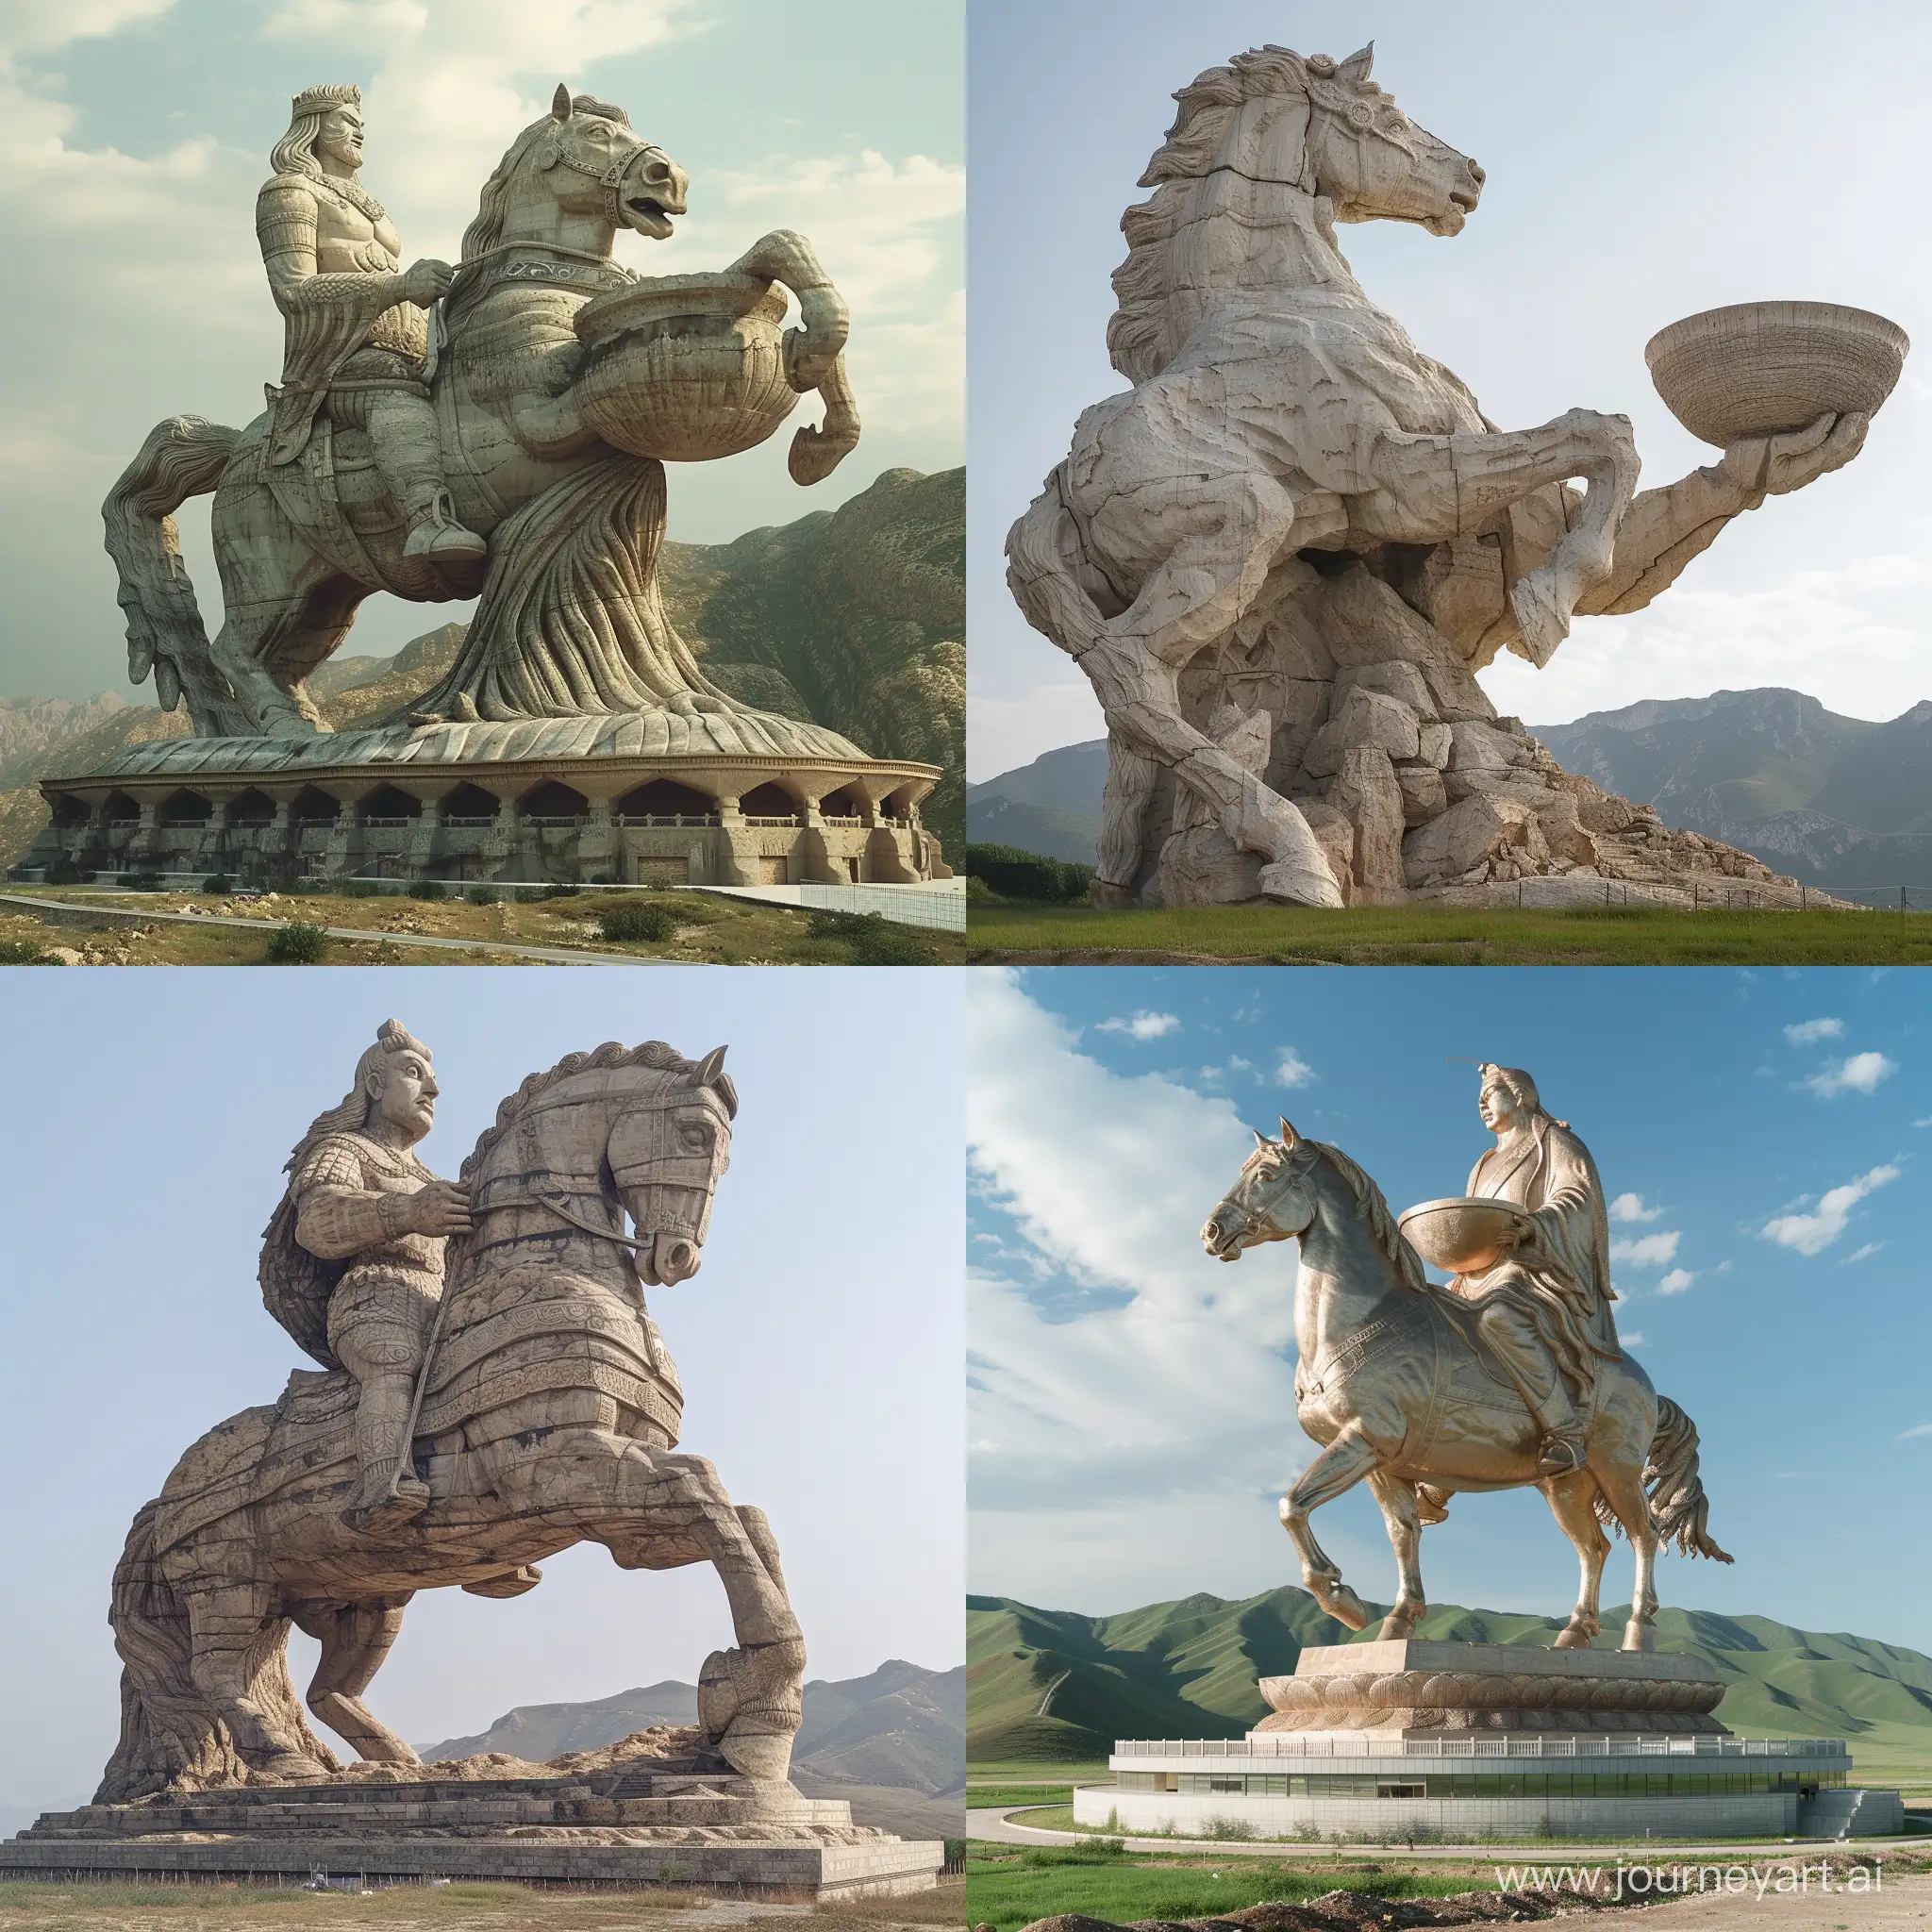 A huge statue of a horseman located in the mountains. The horse stands on its hind legs, and the rider holds a large stone bowl in his hands.